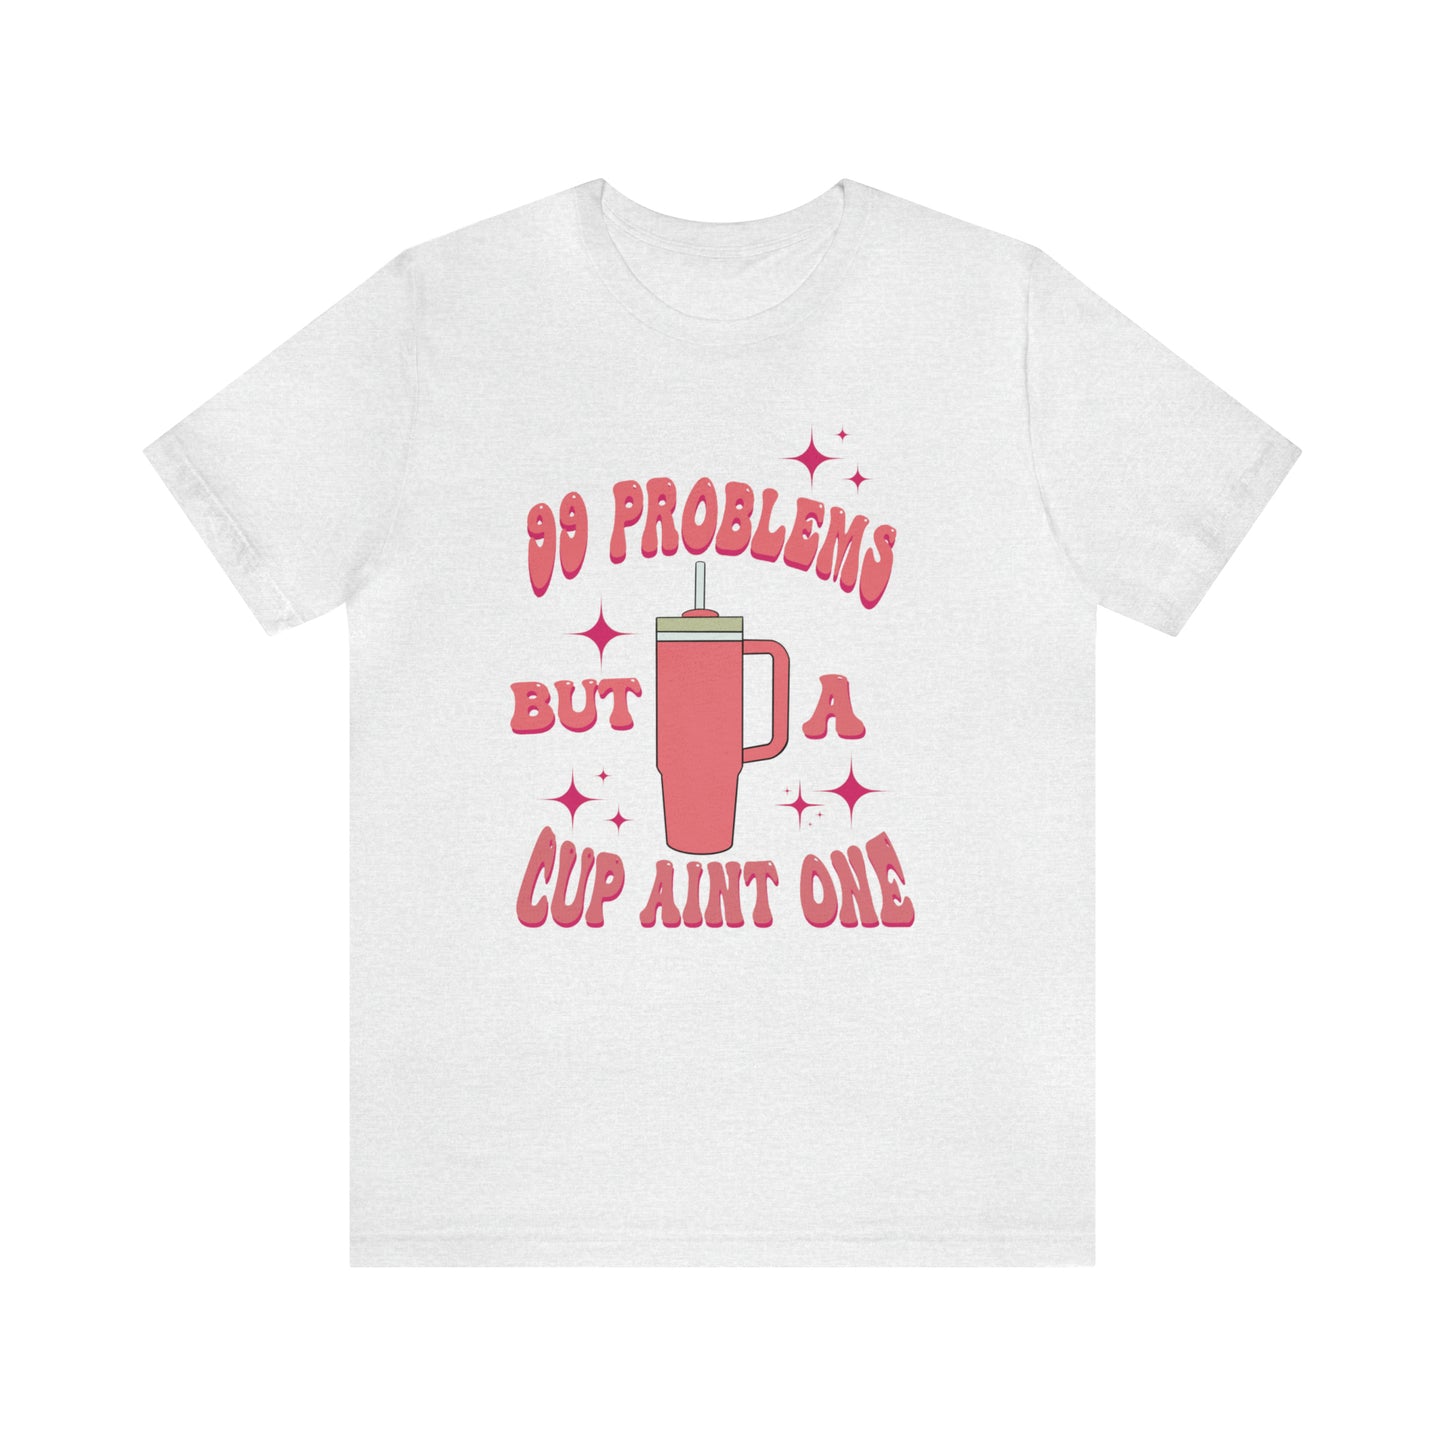 "99 Problems But A Cup Ain't One" Bella Canvas Short Sleeve Tee